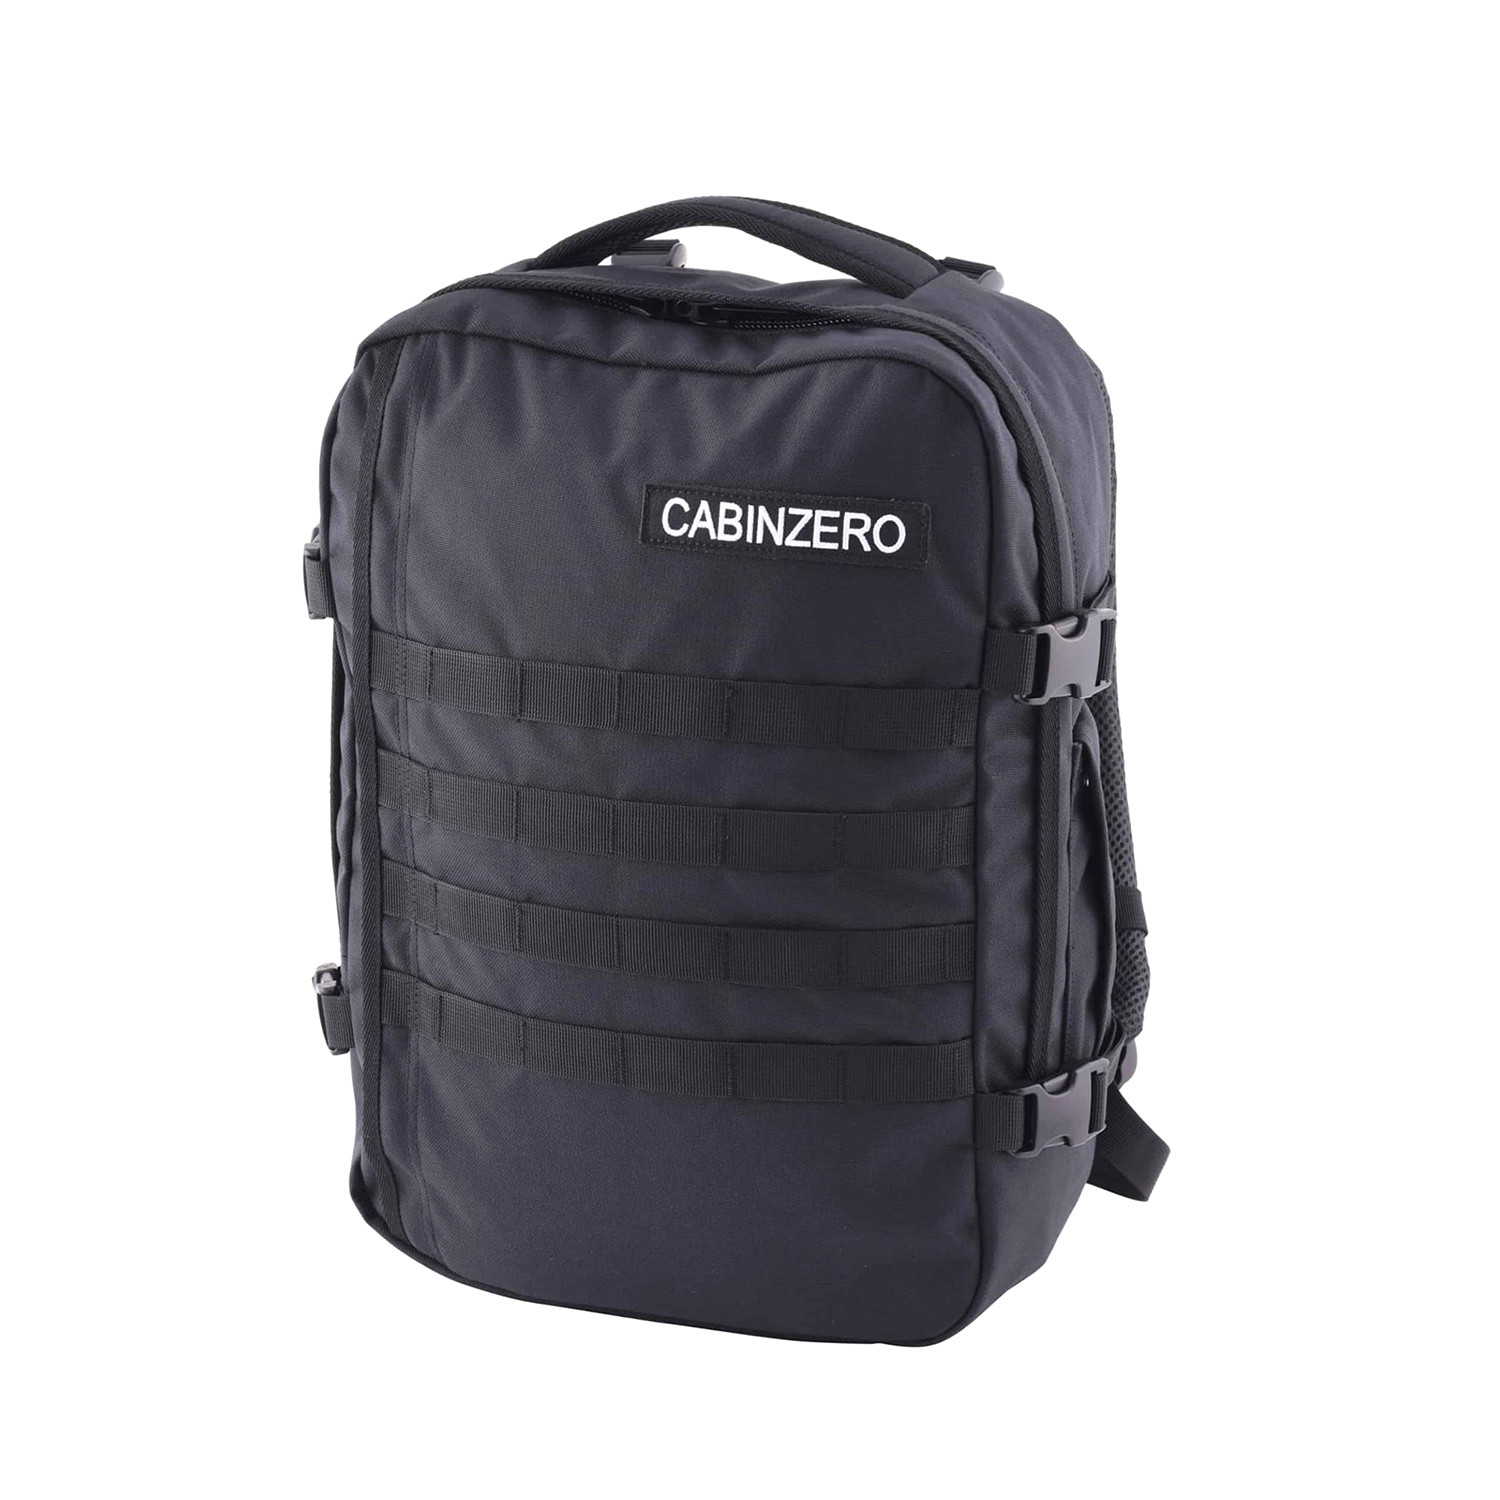 28L Military Backpack // Absolute Black - Cabin Zero - Touch of Modern